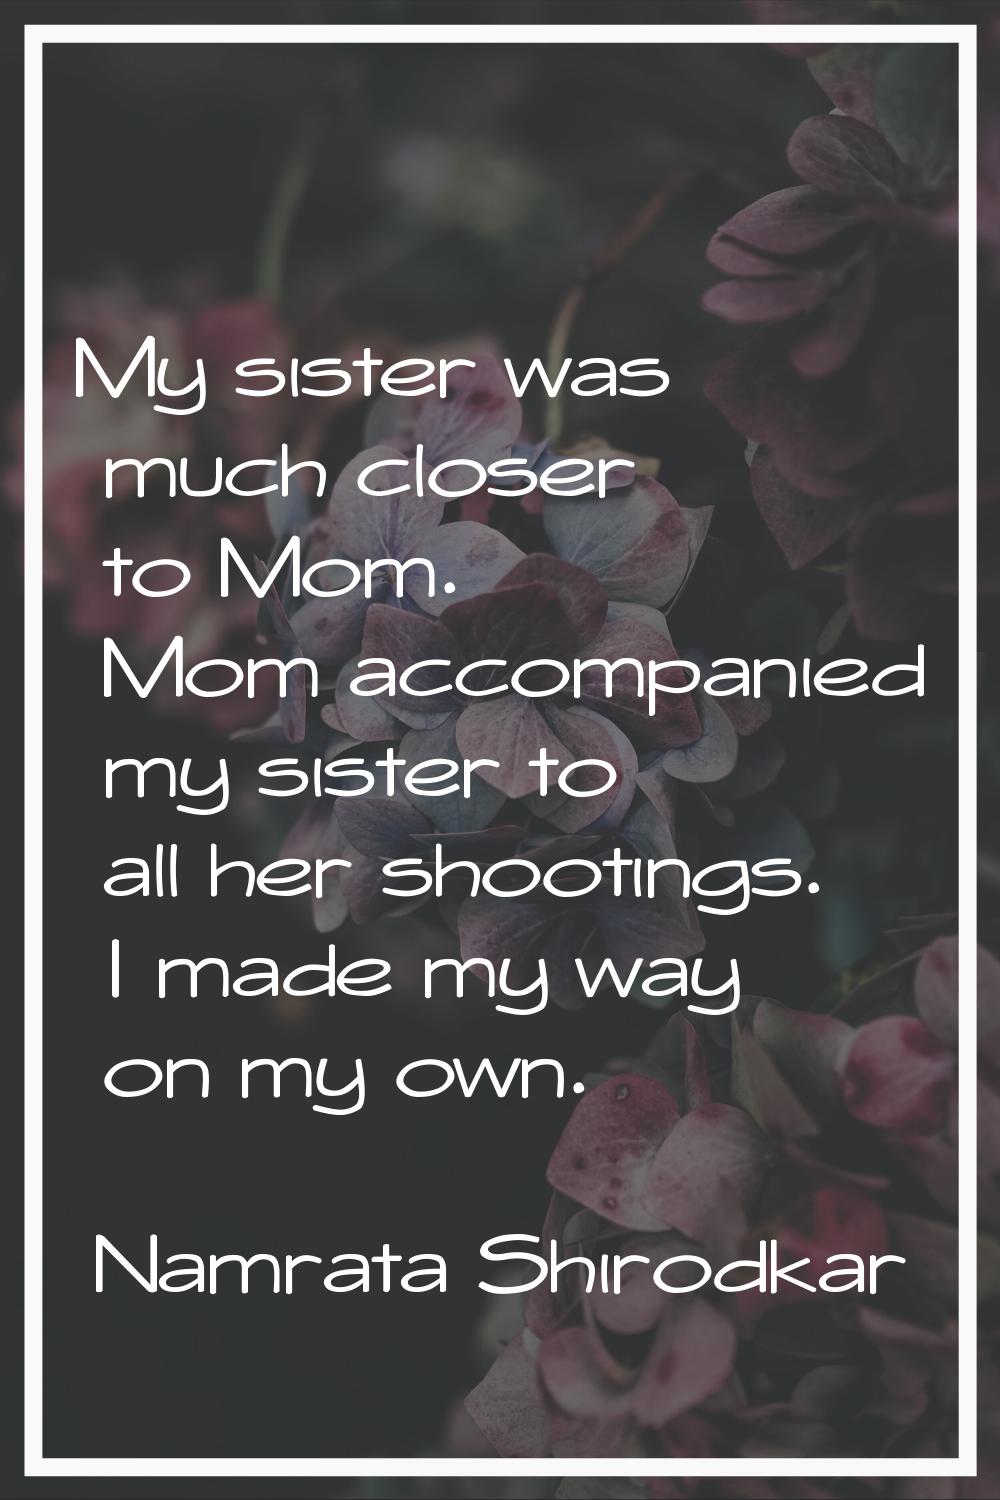 My sister was much closer to Mom. Mom accompanied my sister to all her shootings. I made my way on 